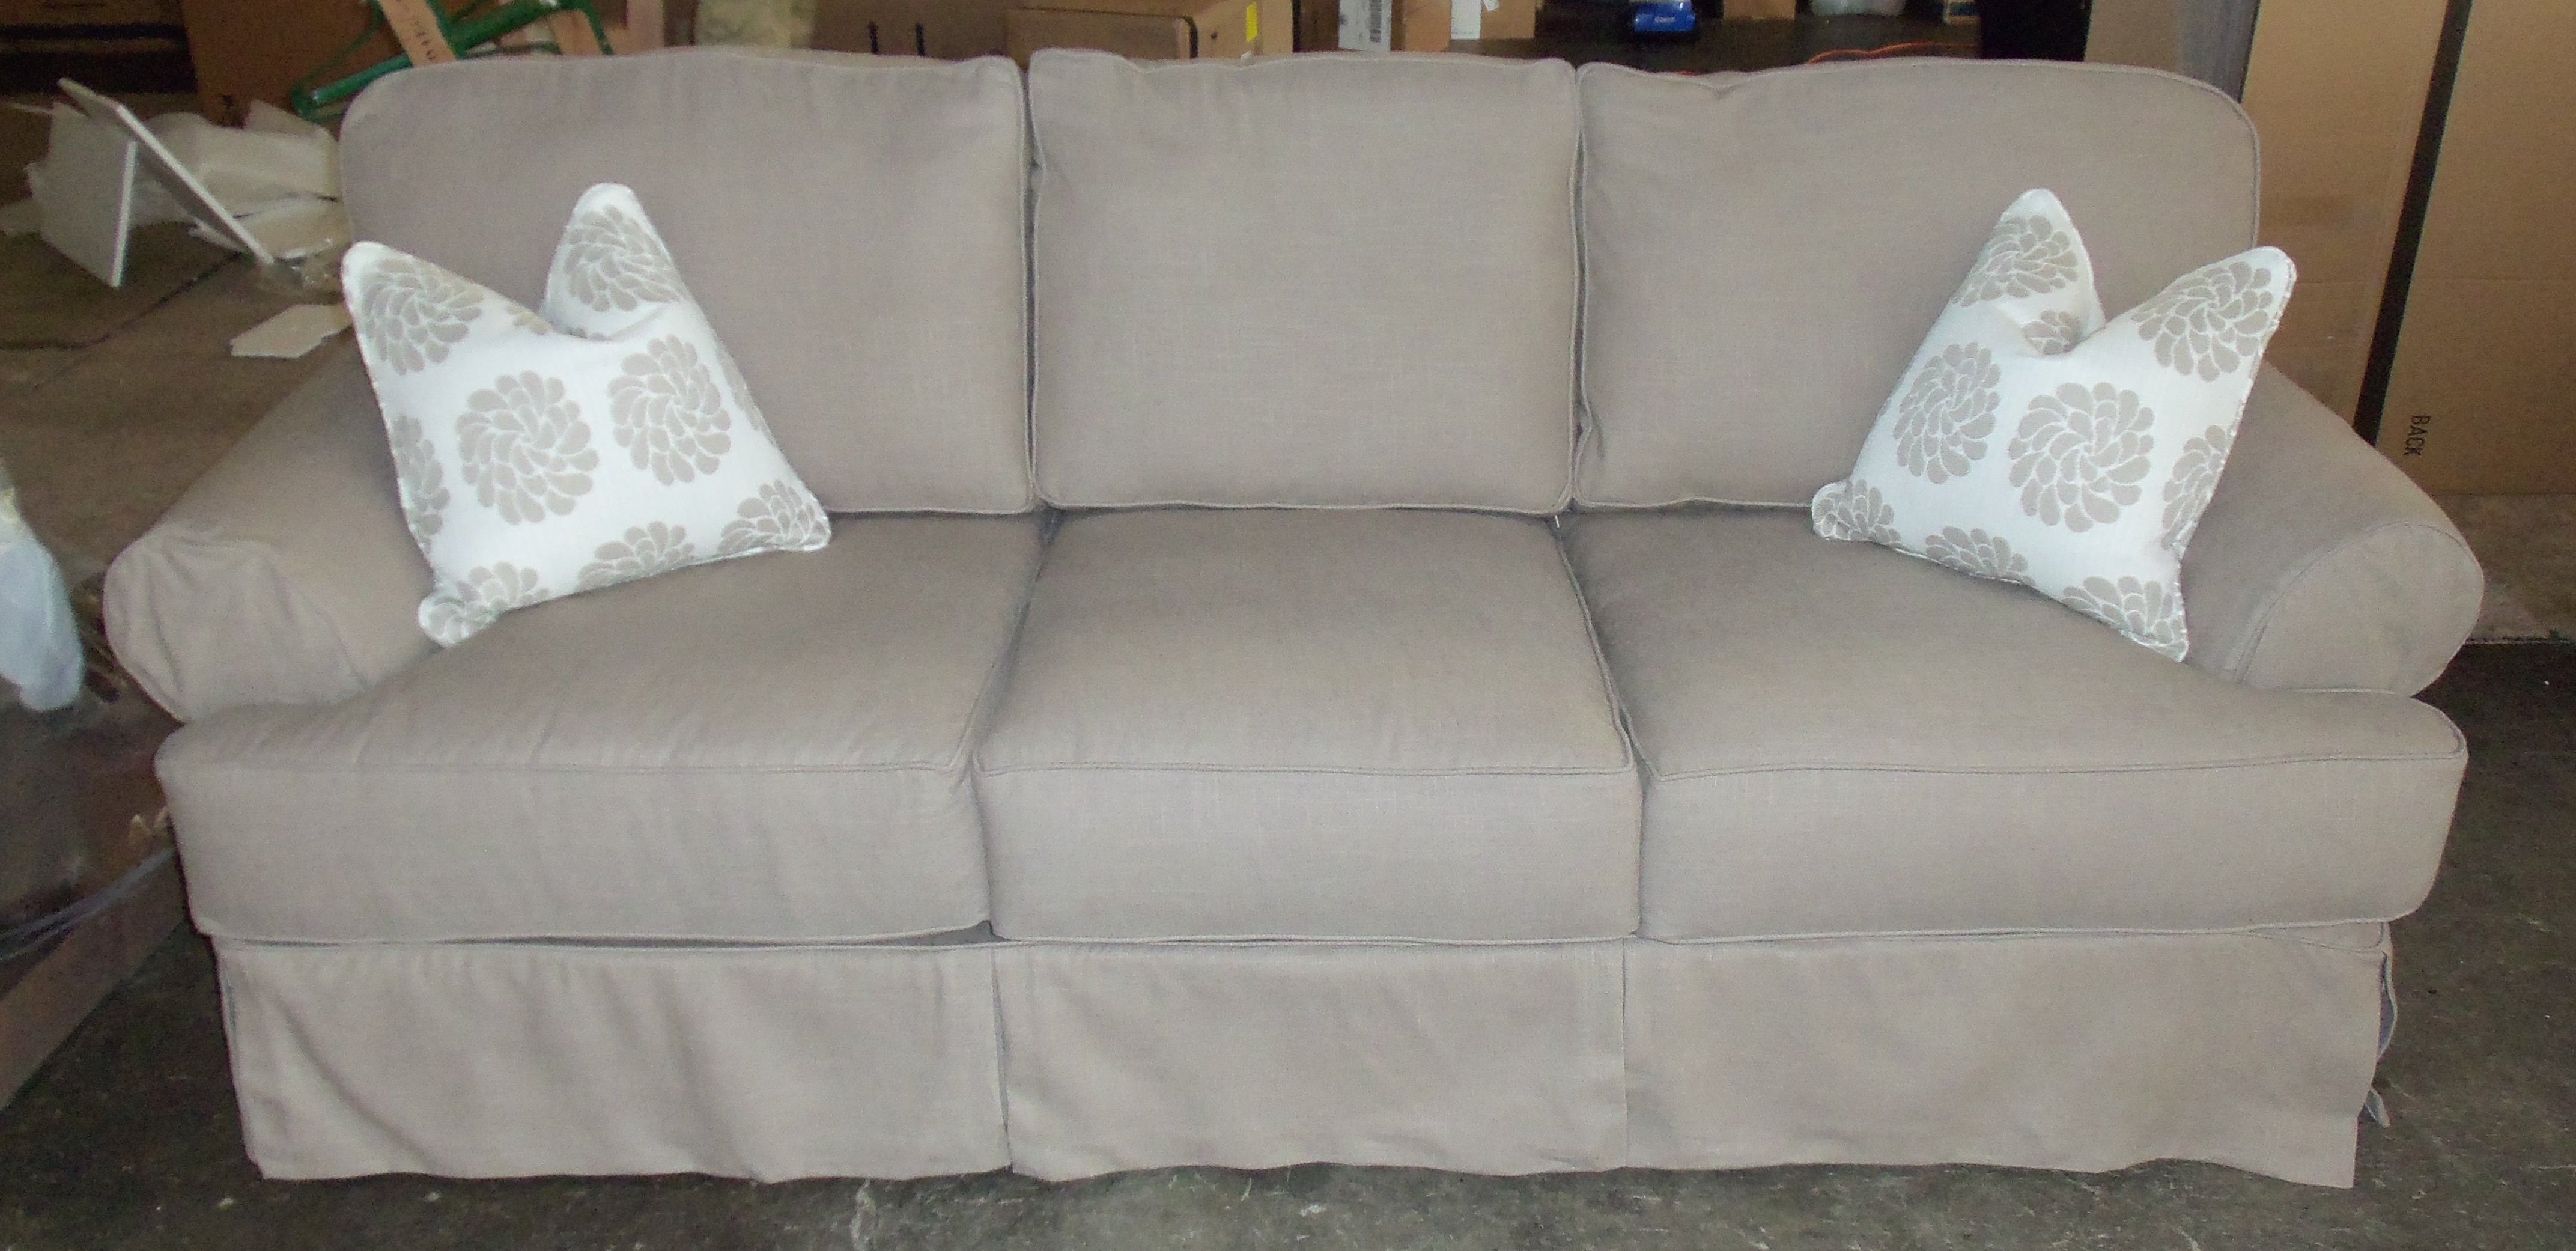 Sofas Center Piecea Covers Remarkable Picture Design Slipcovers Throughout 3 Piece Sectional Sofa Slipcovers (View 9 of 15)